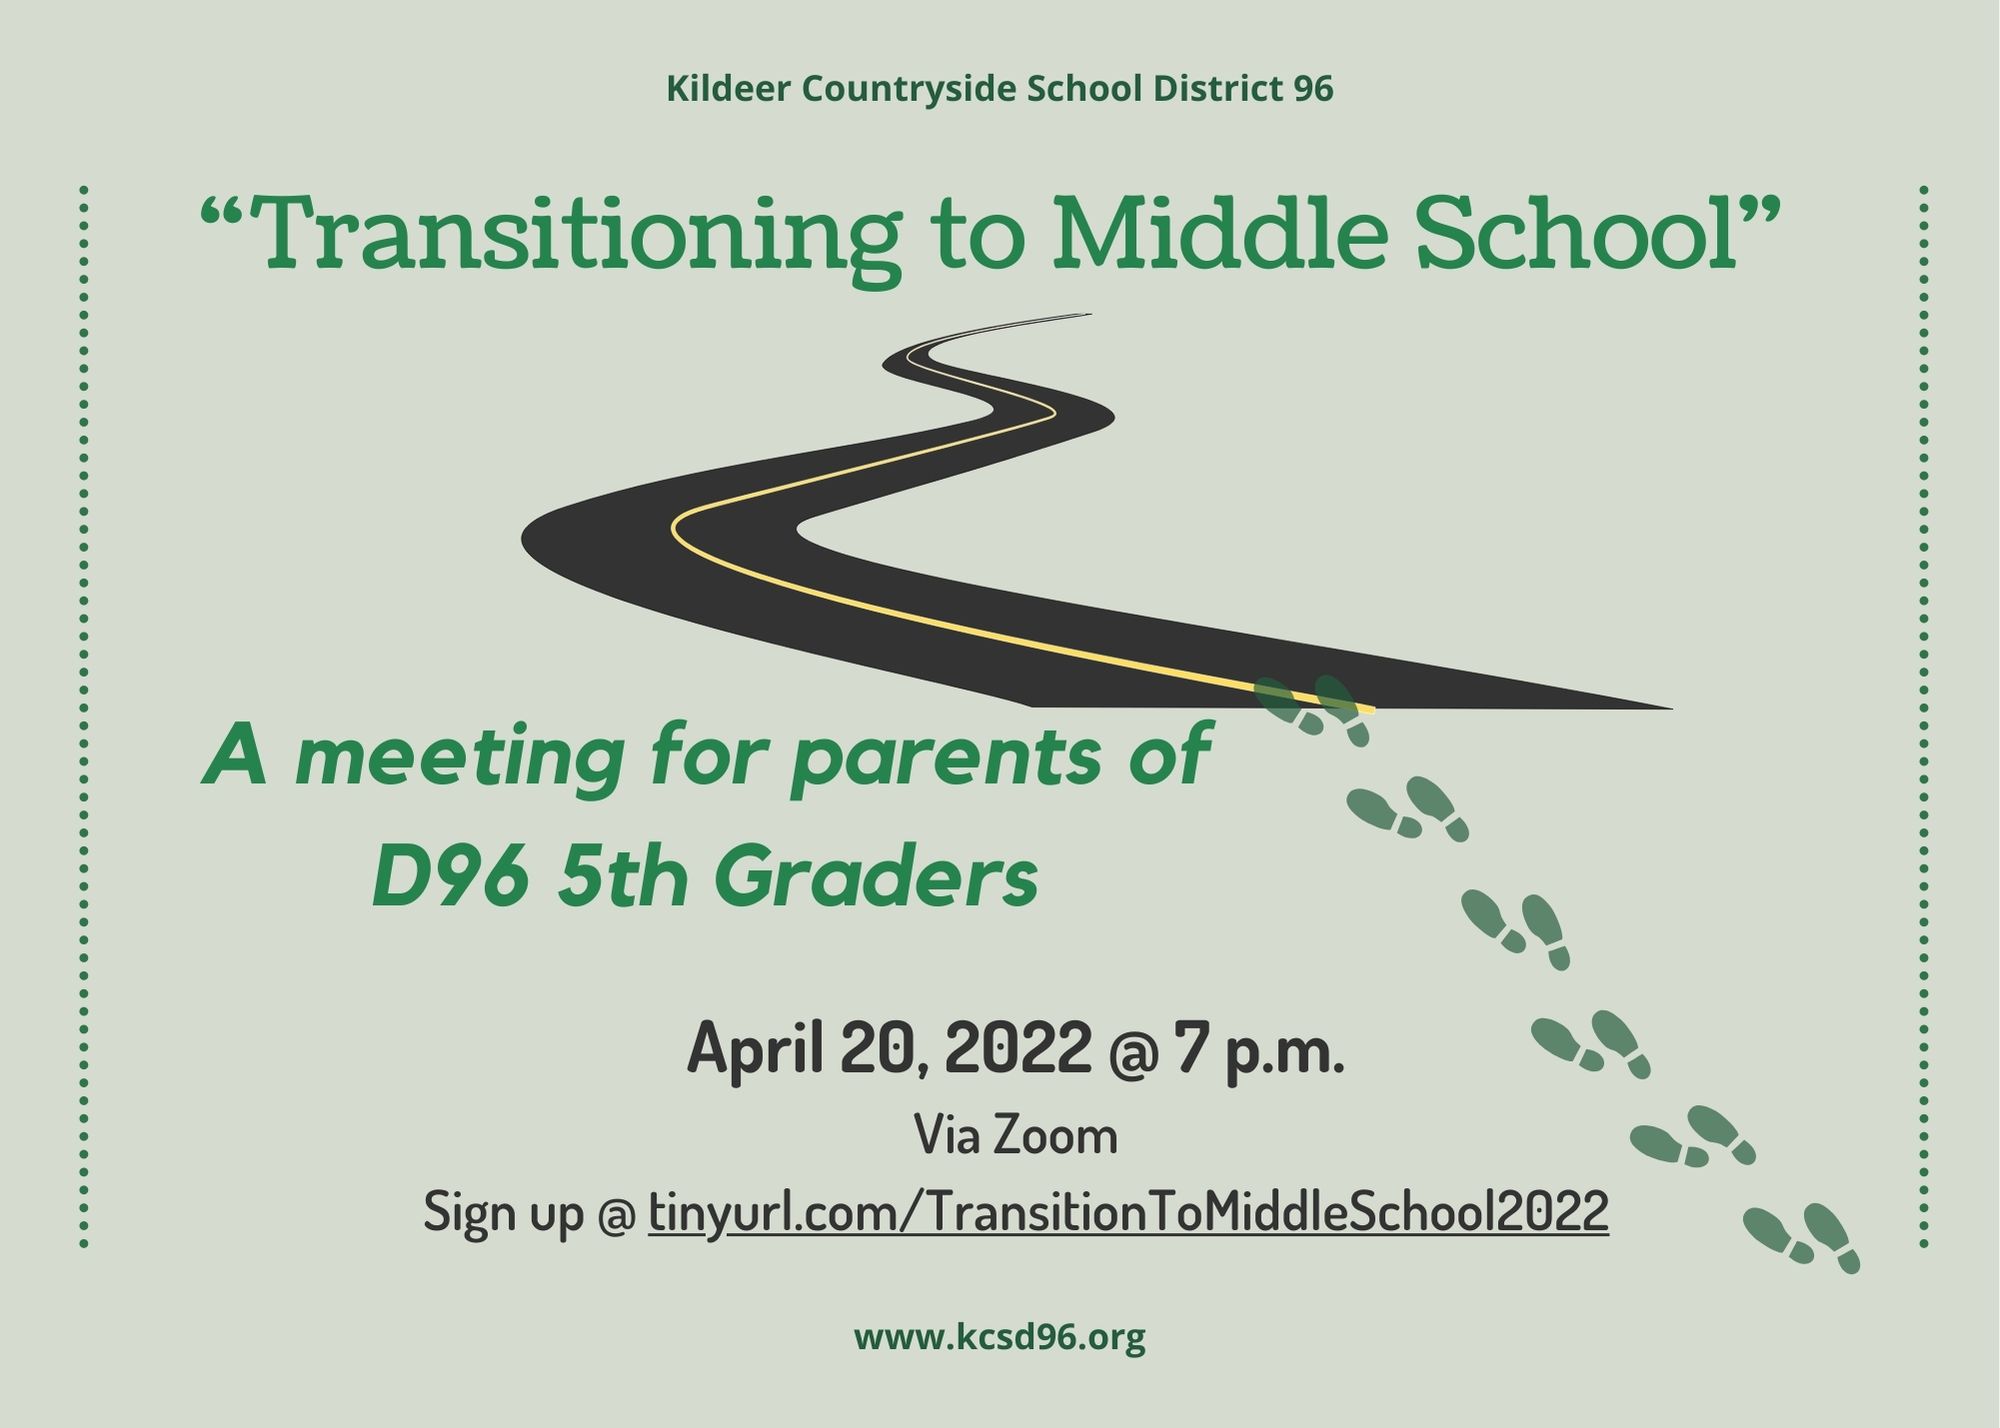 Transition to Middle School: April 20, 2022